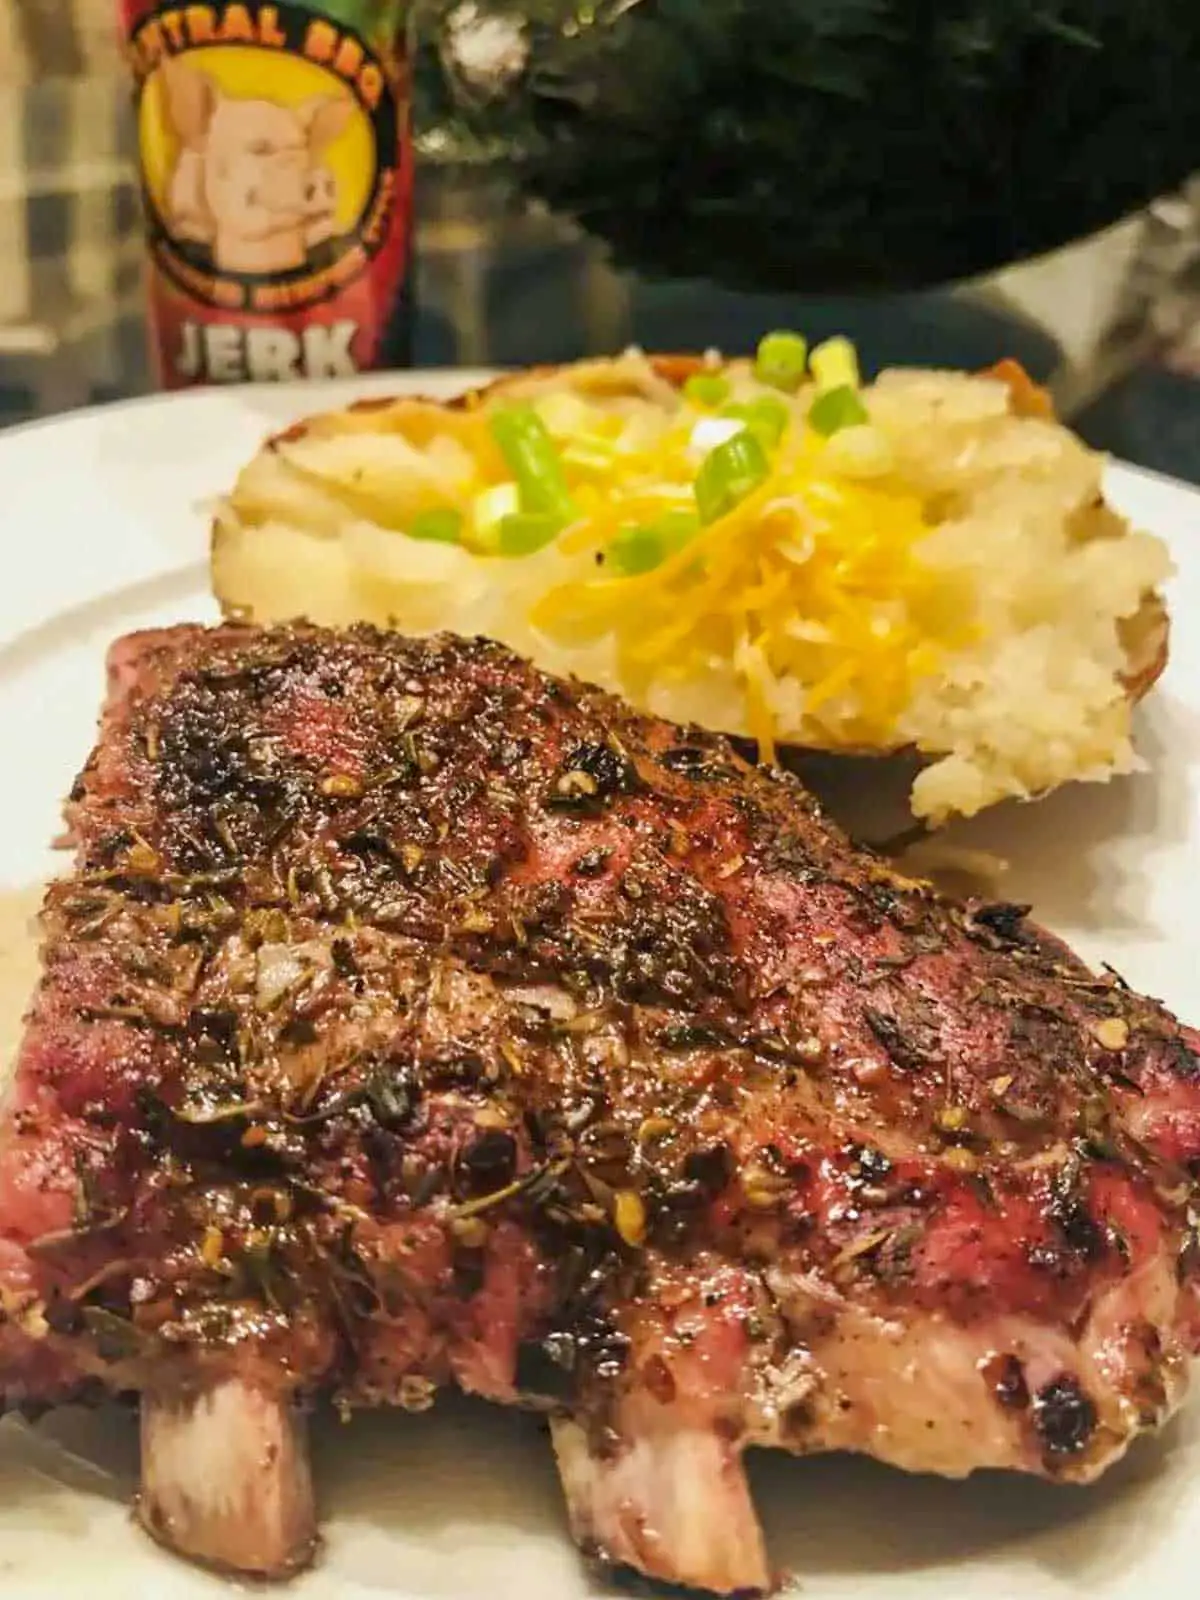 A rack of baby back pork ribs and a baked potato with cheese and green onions on a white plate. There is a bottle of Central BBQ Jerk Seasoning in the background.